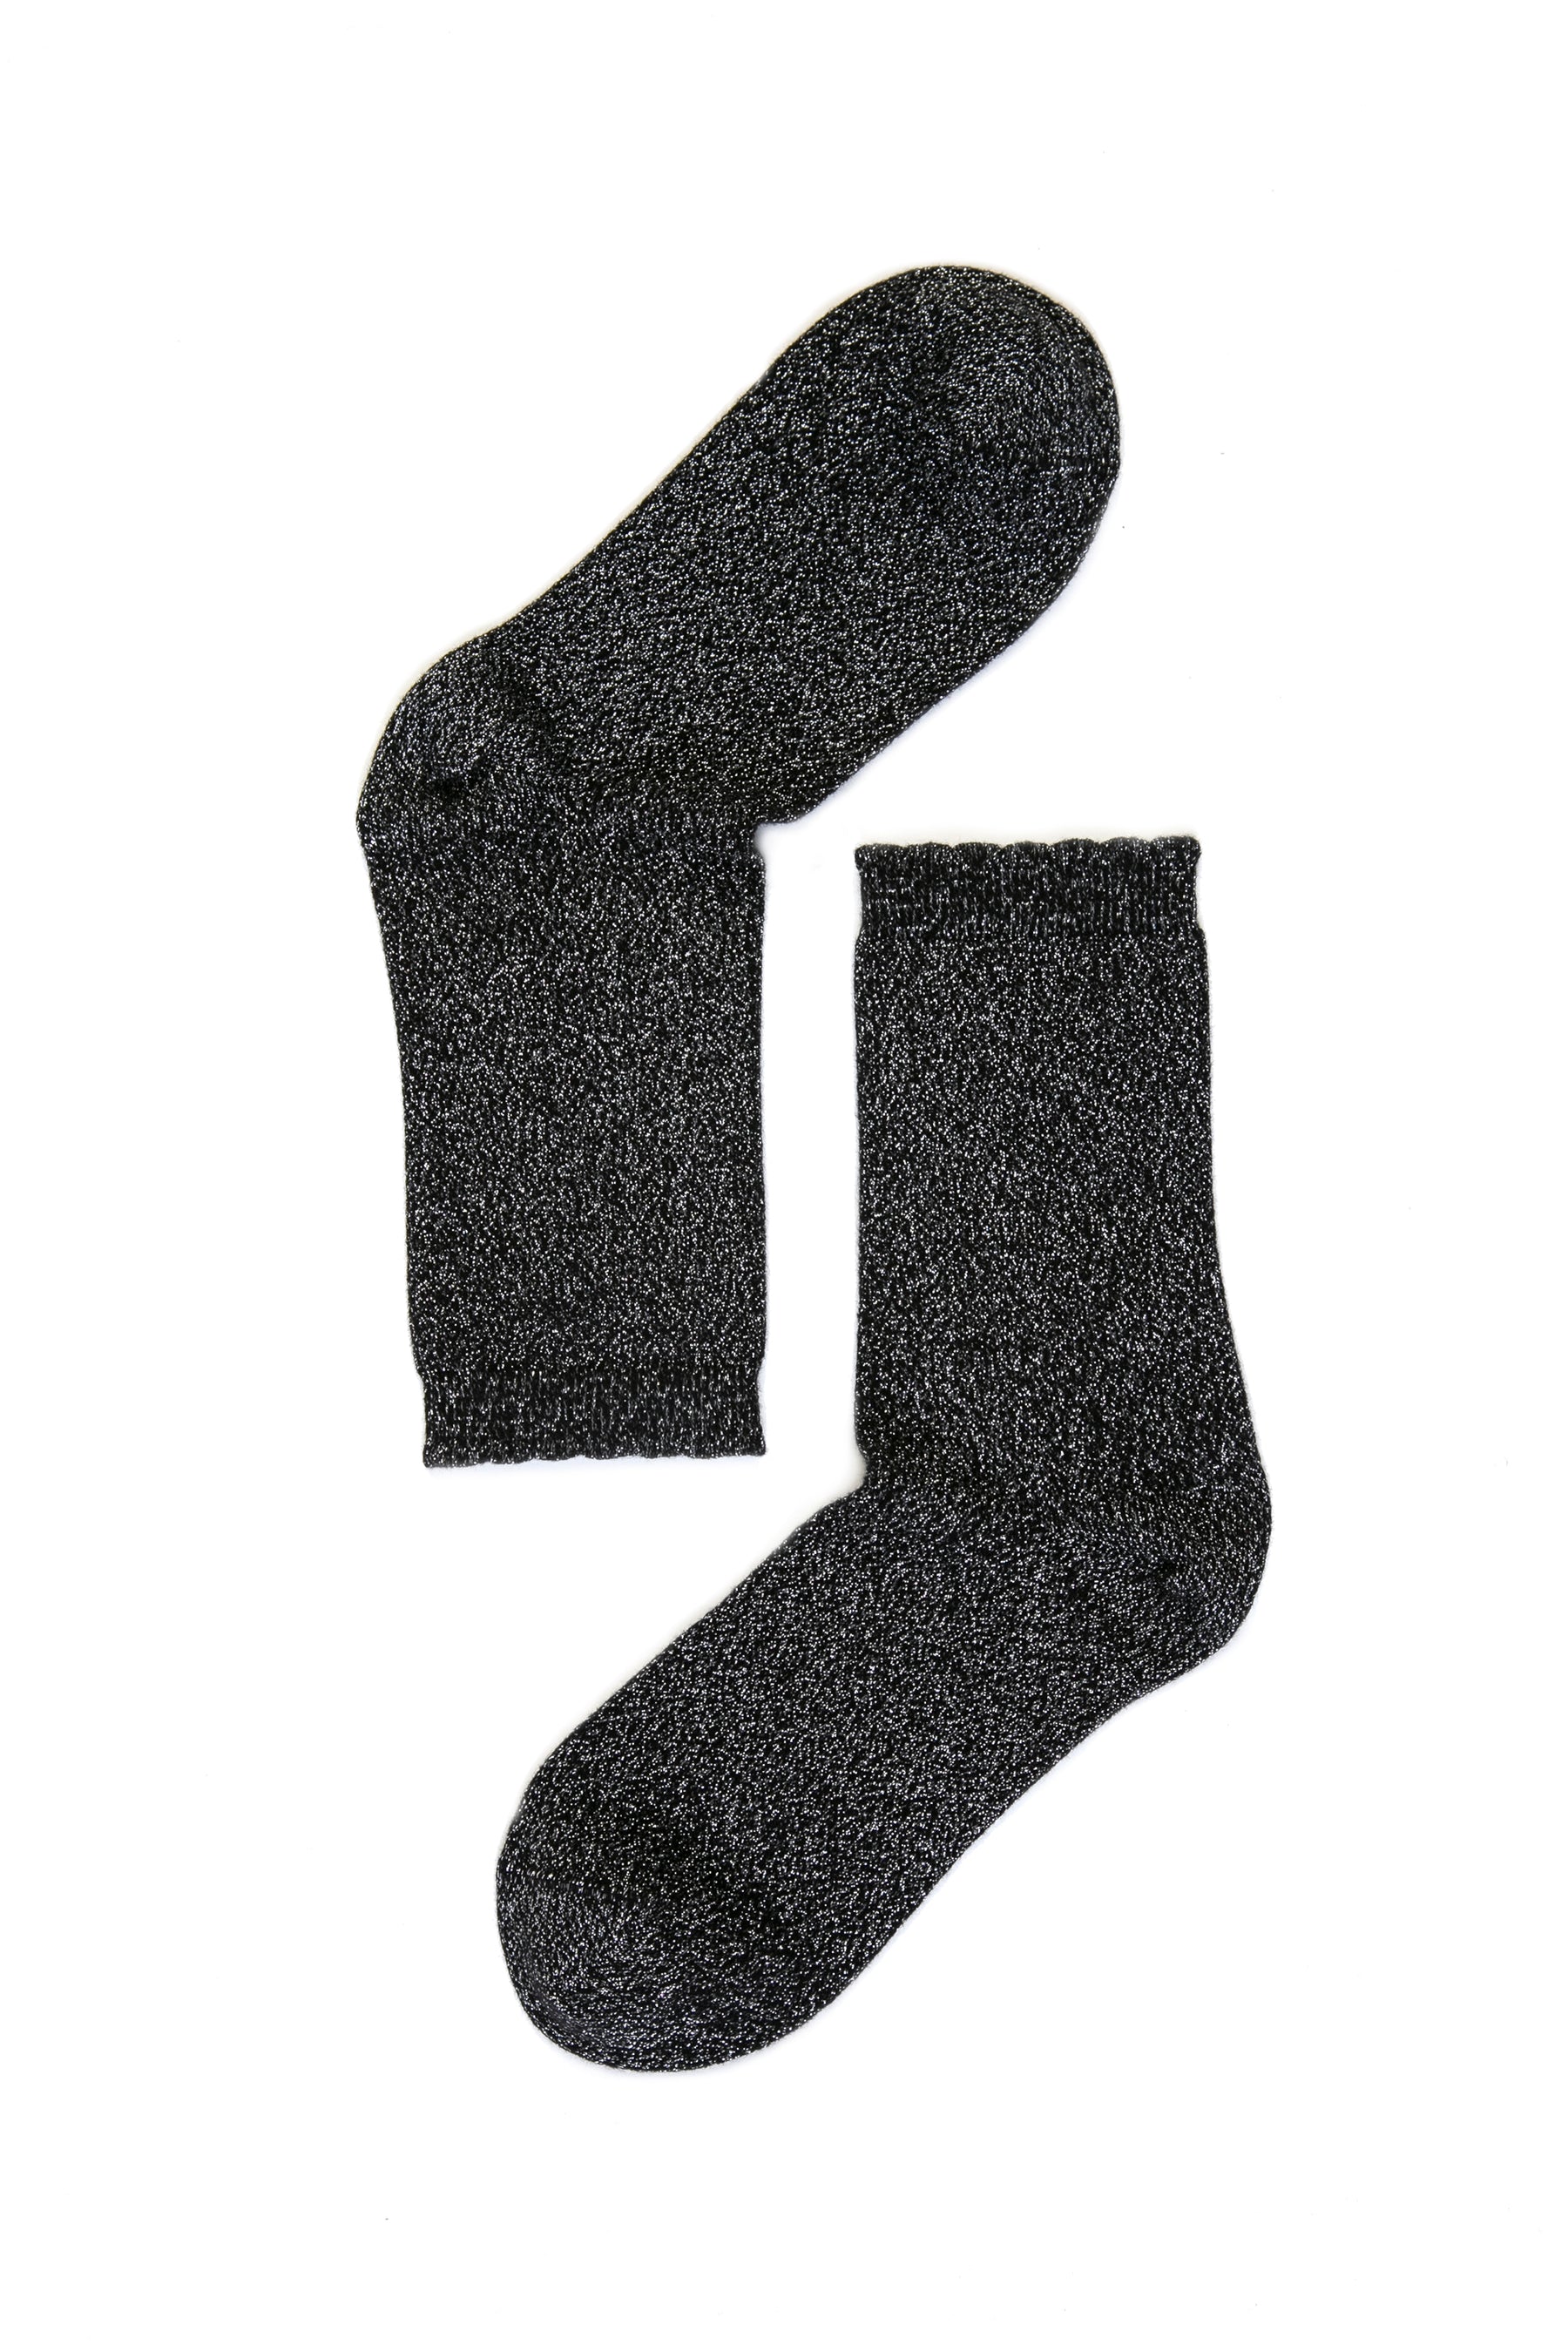 Chaussettes Lurex - Pirate Black - Chaussettes - We Are Jolies